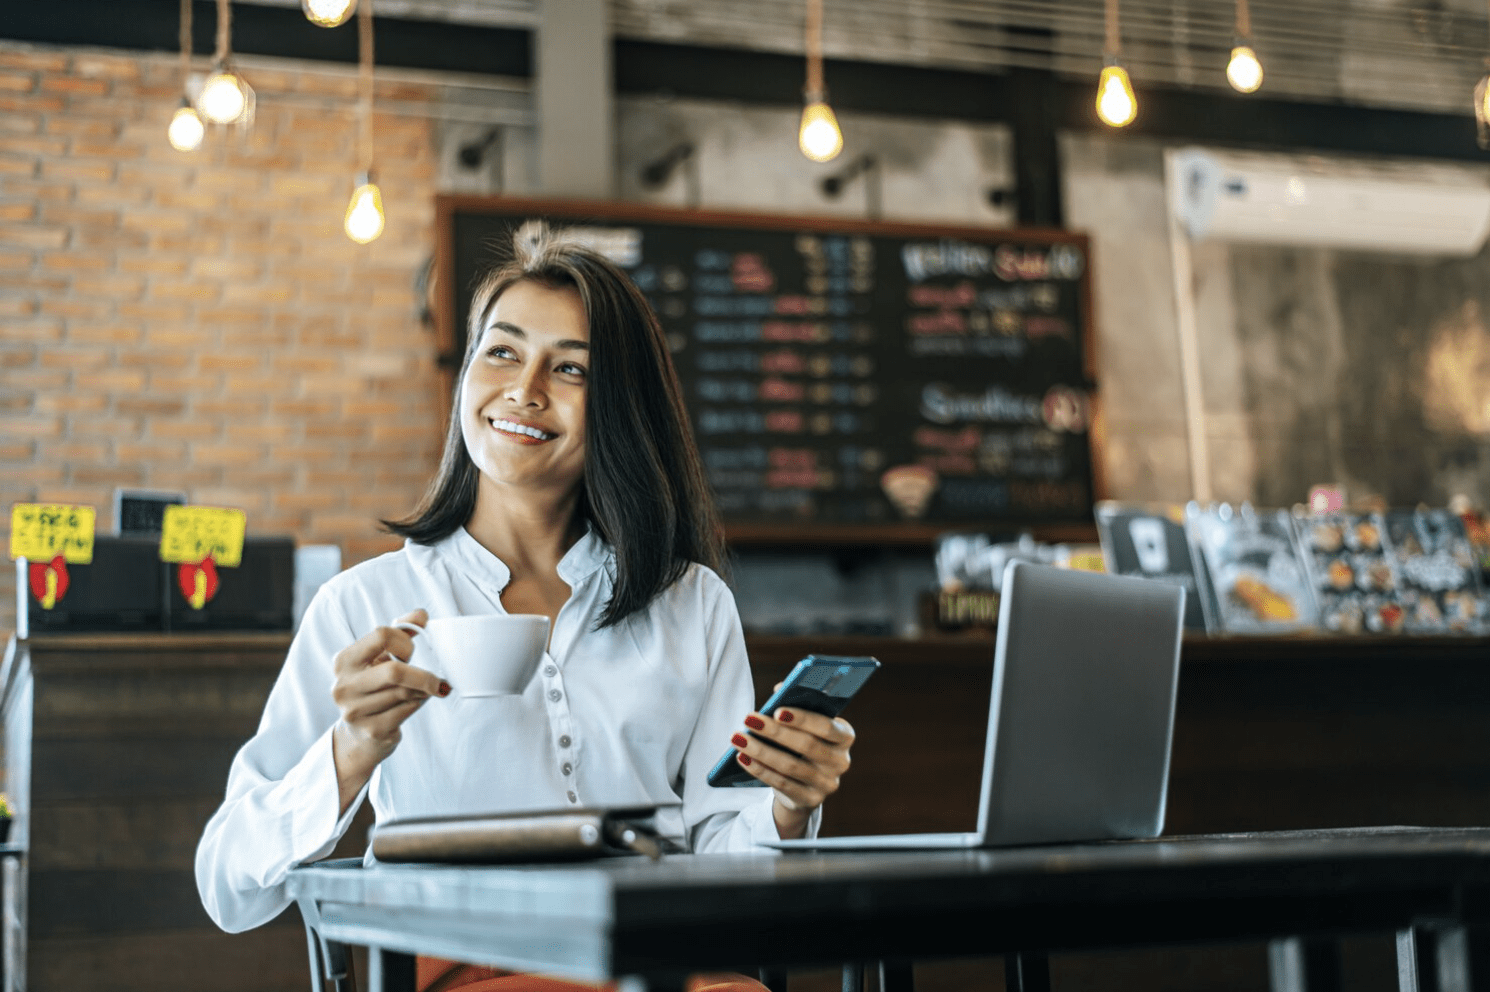 A small business owner is drinking coffee while working at her cafe. Merchant payment solutions can improve merchant experiences and loyalty, whether its resilient payment processing solutions to disbursements.